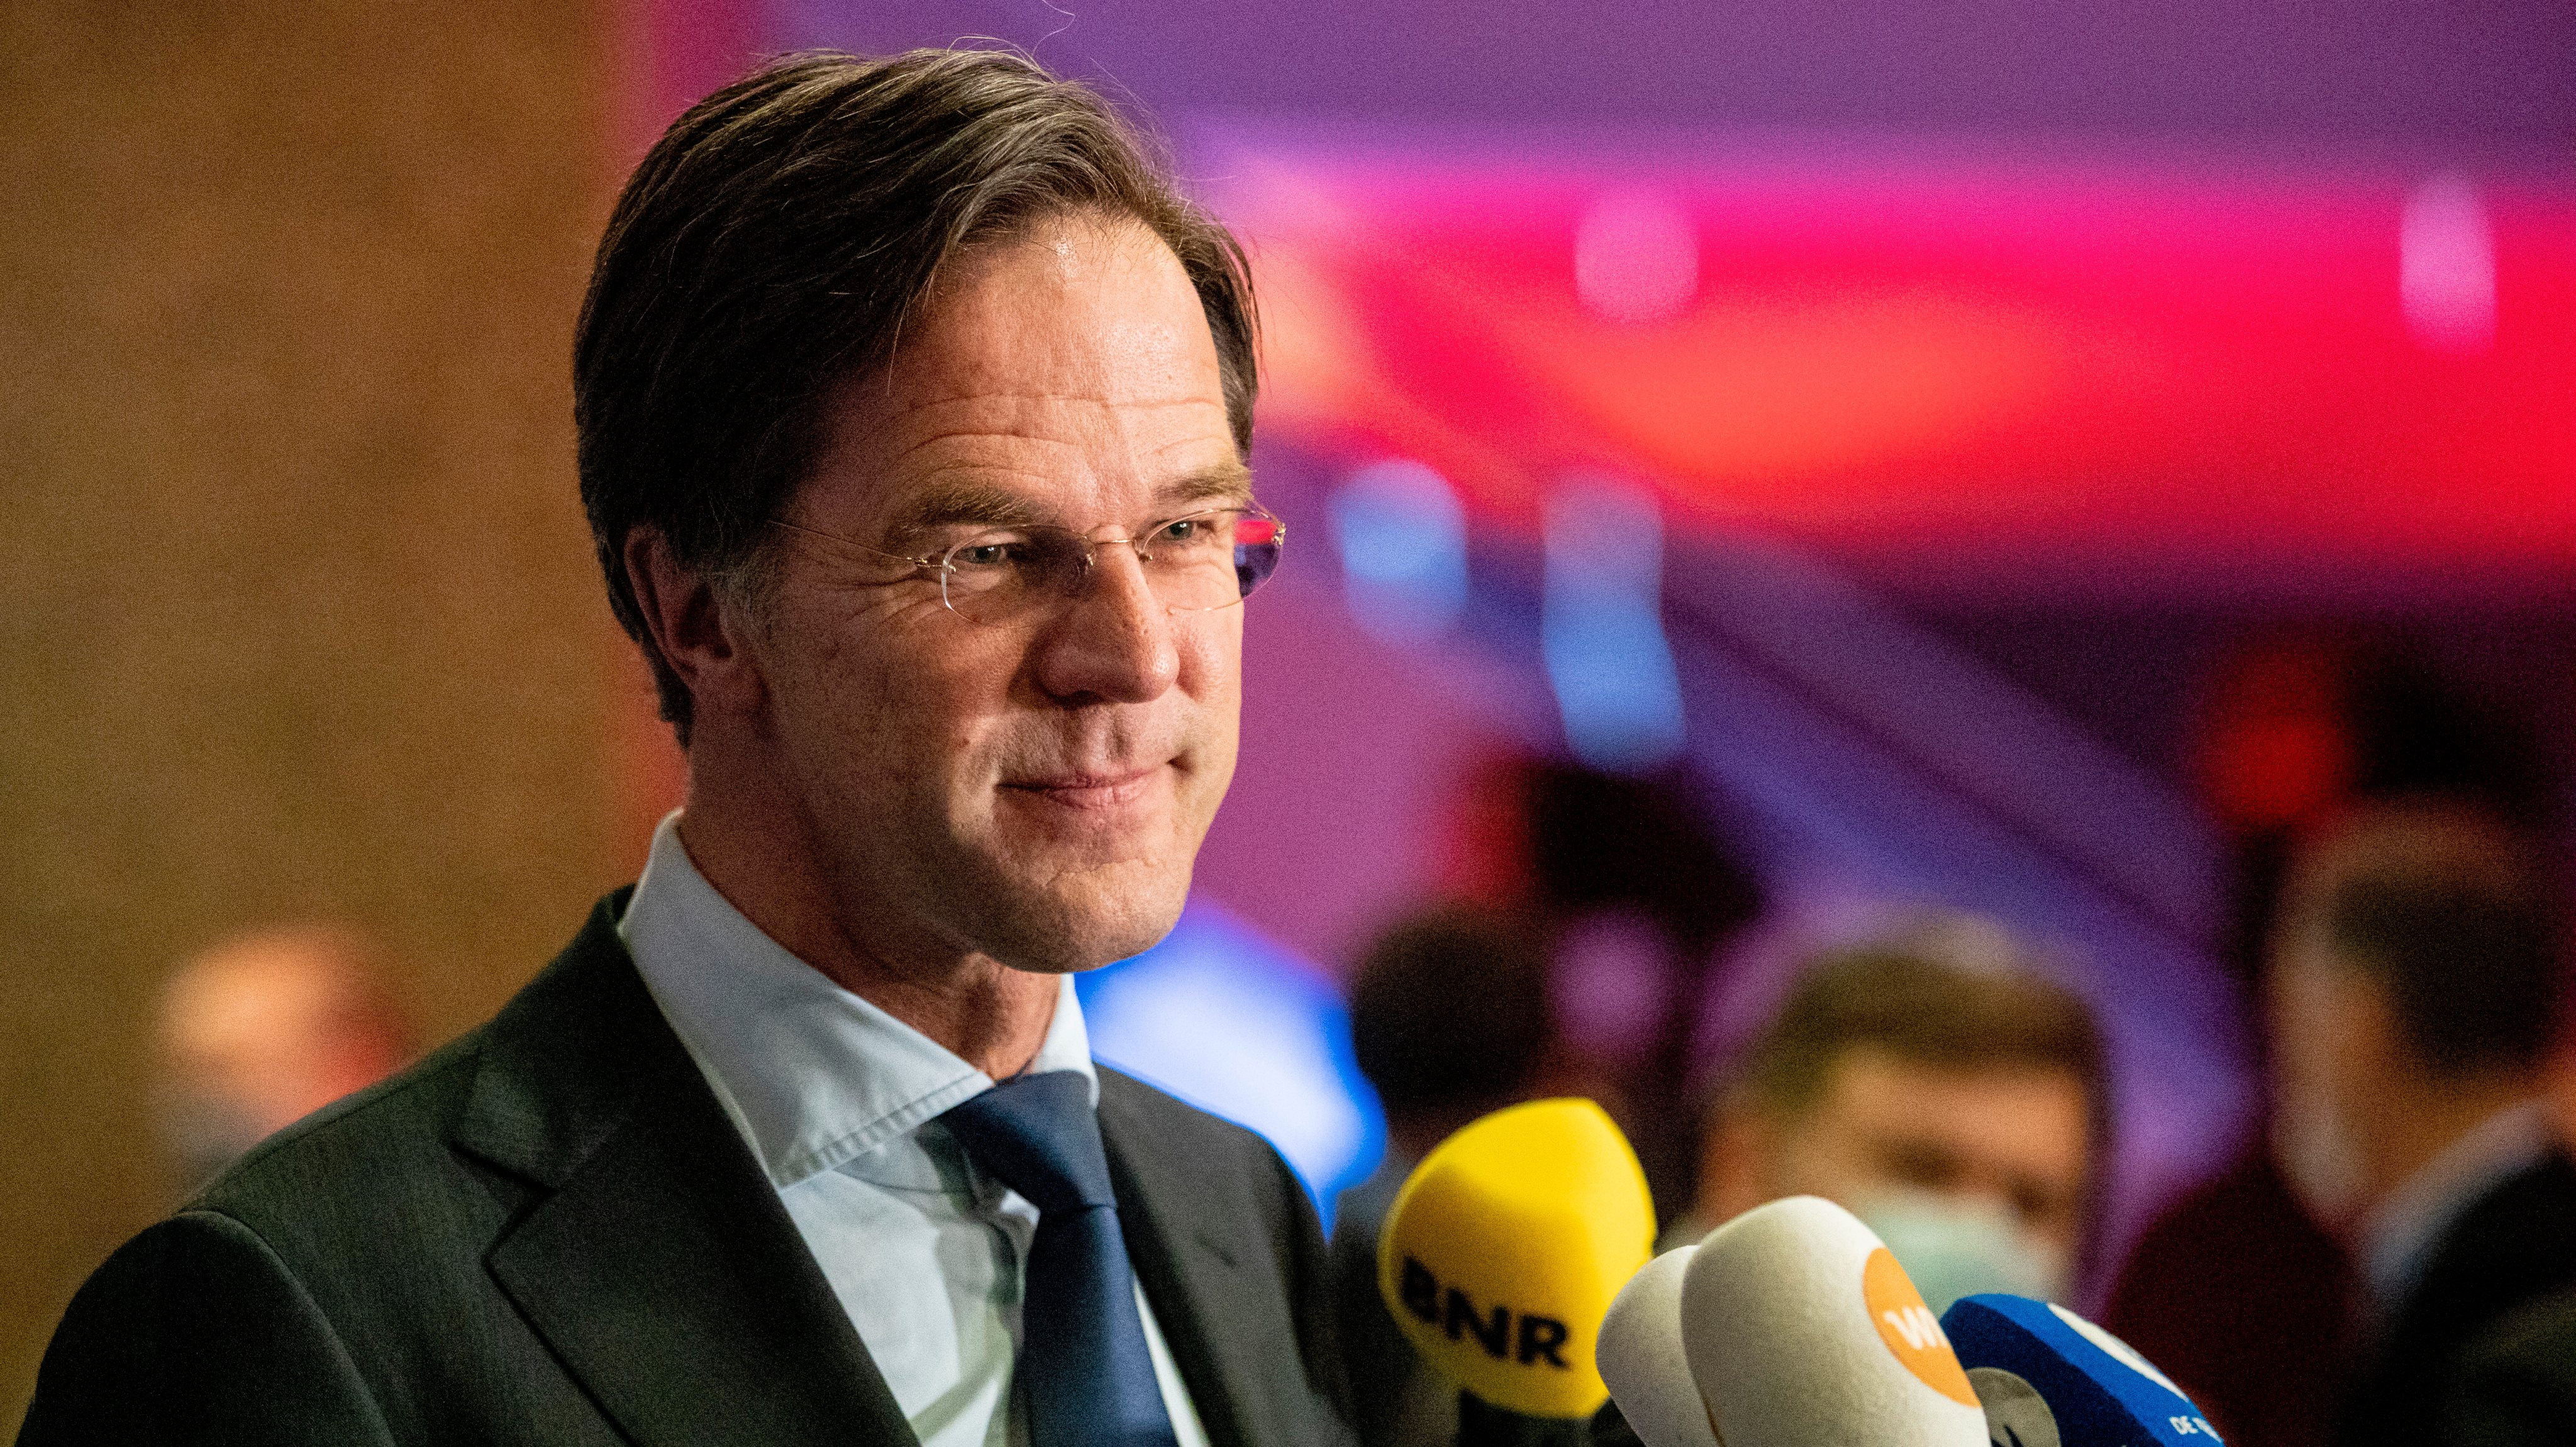 Mark Rutte reacts on results during 2021 Dutch General Election